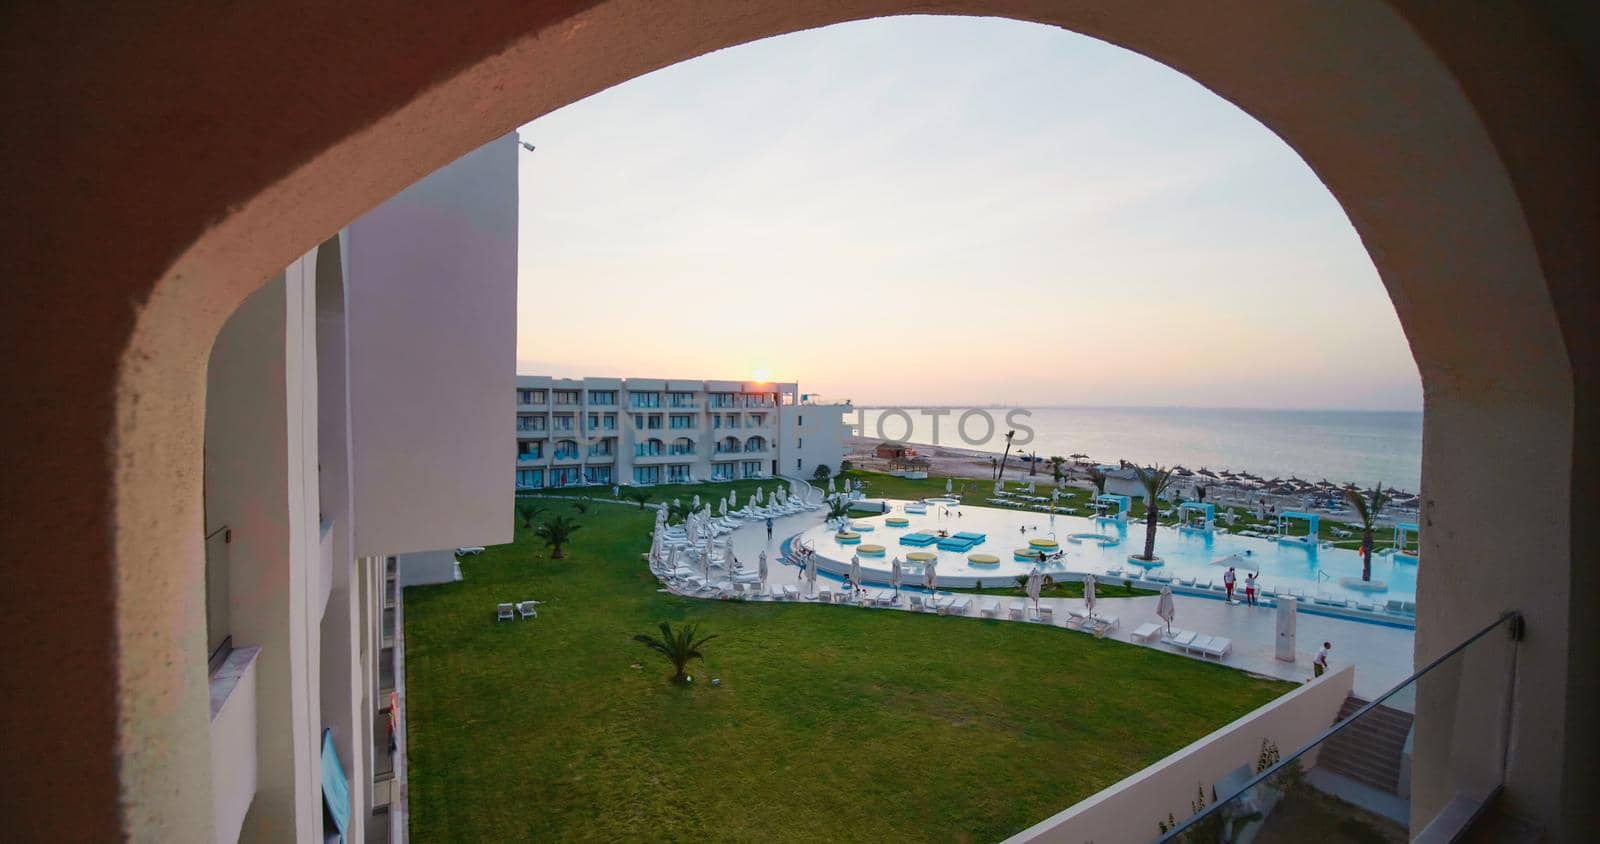 Tunisia, 2022: Luxury hotel on the coast of Tunisia. Beautiful tropical beach front hotel resort with swimming pool, palm trees.